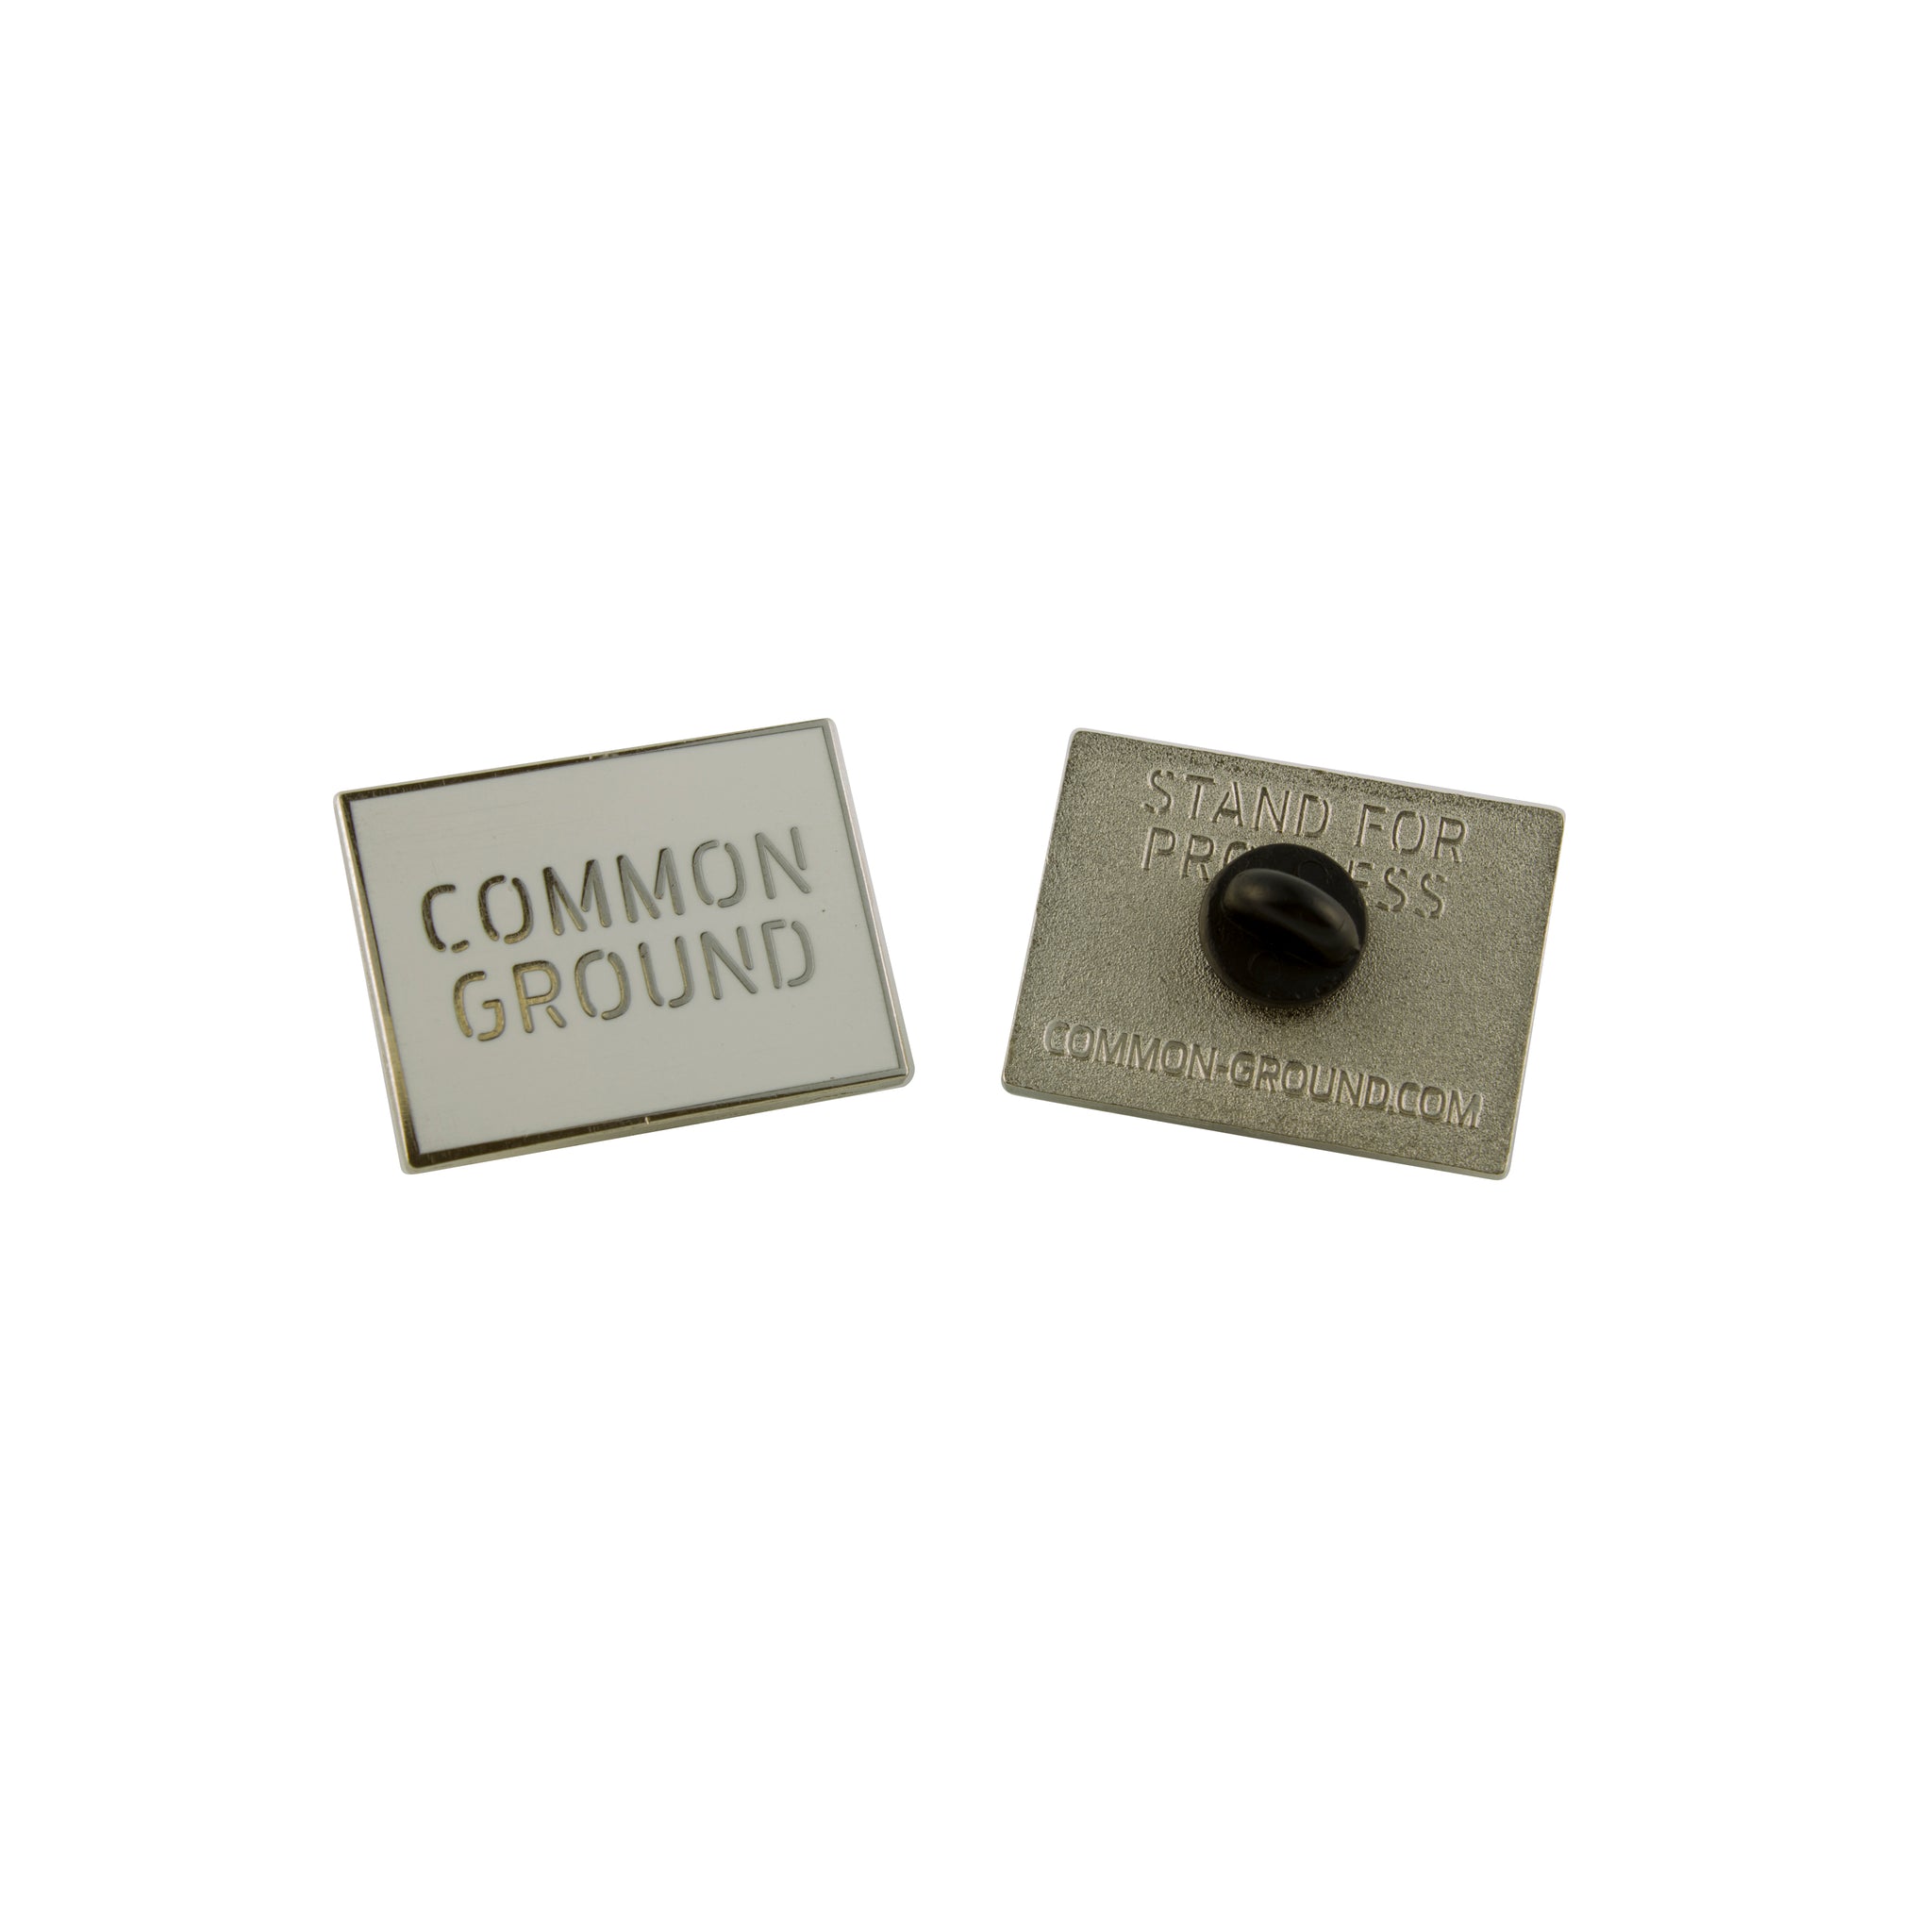 Bright_White - Common Ground Pin Front and Back View